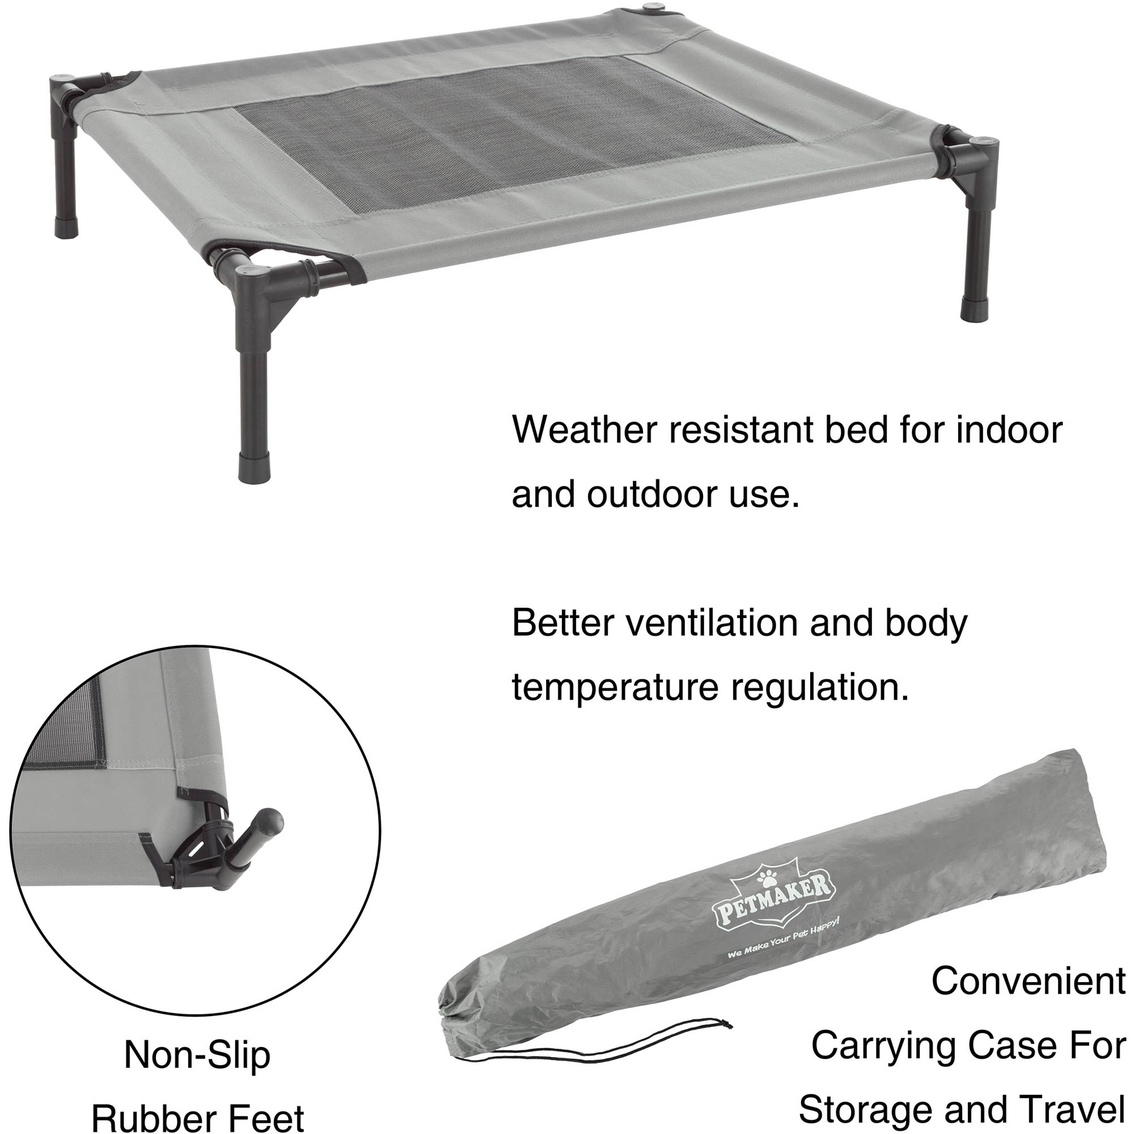 Petmaker Elevated Pet Bed with Non Slip Feet - Image 4 of 7